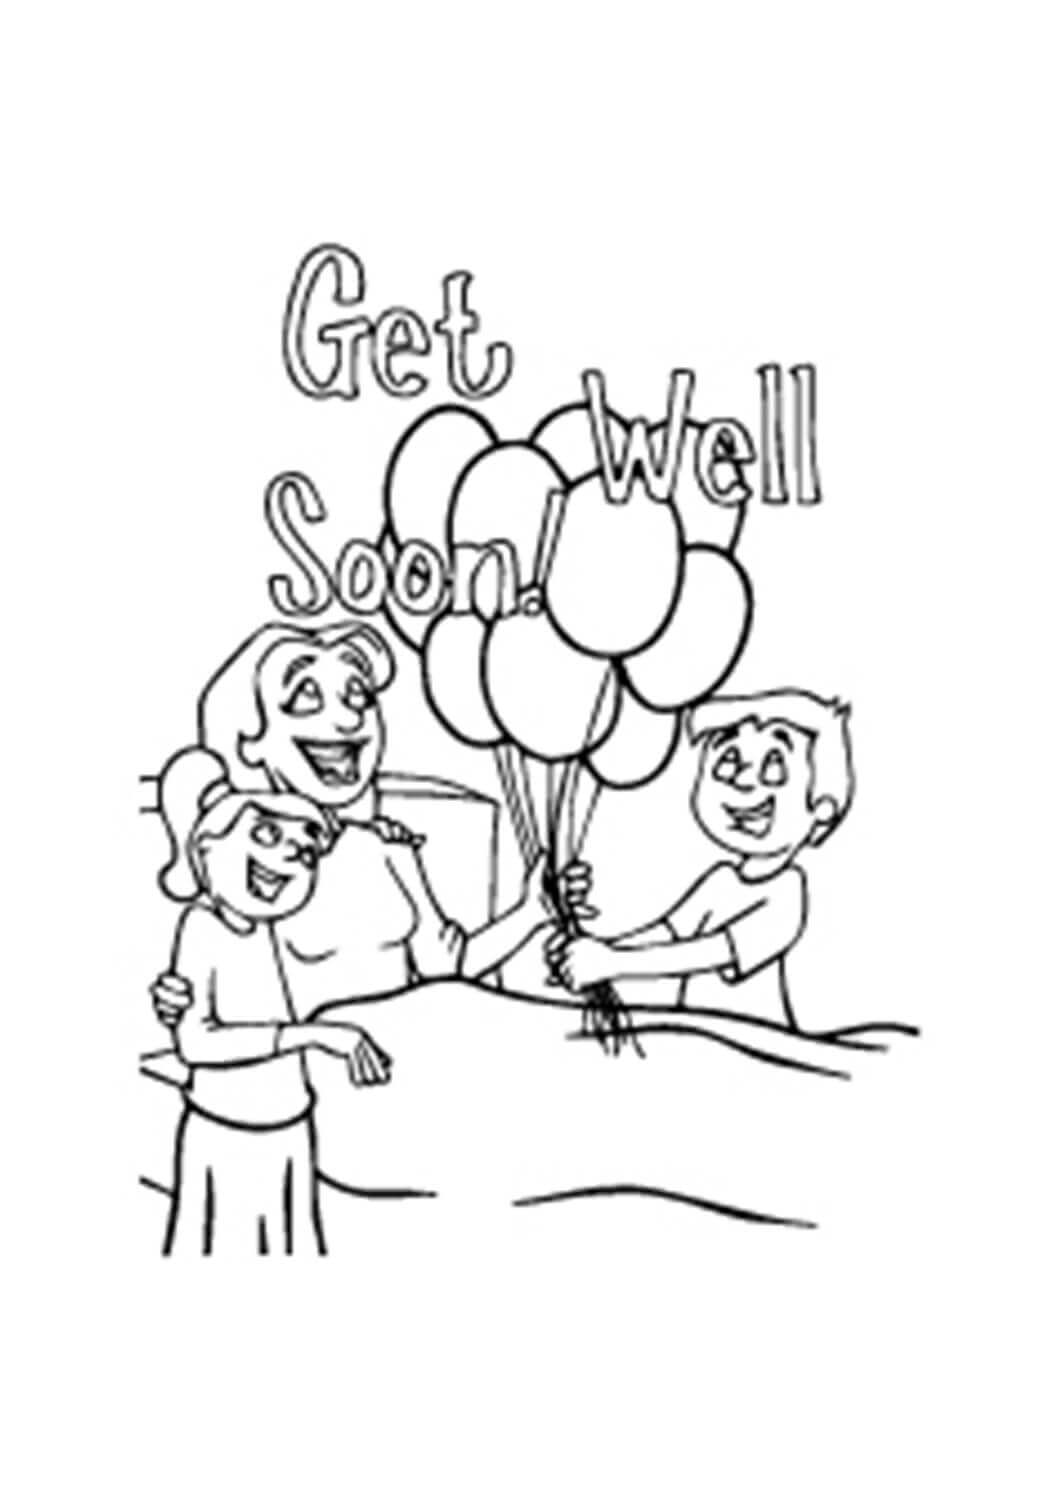 Get Well Soon Mom Coloring Page